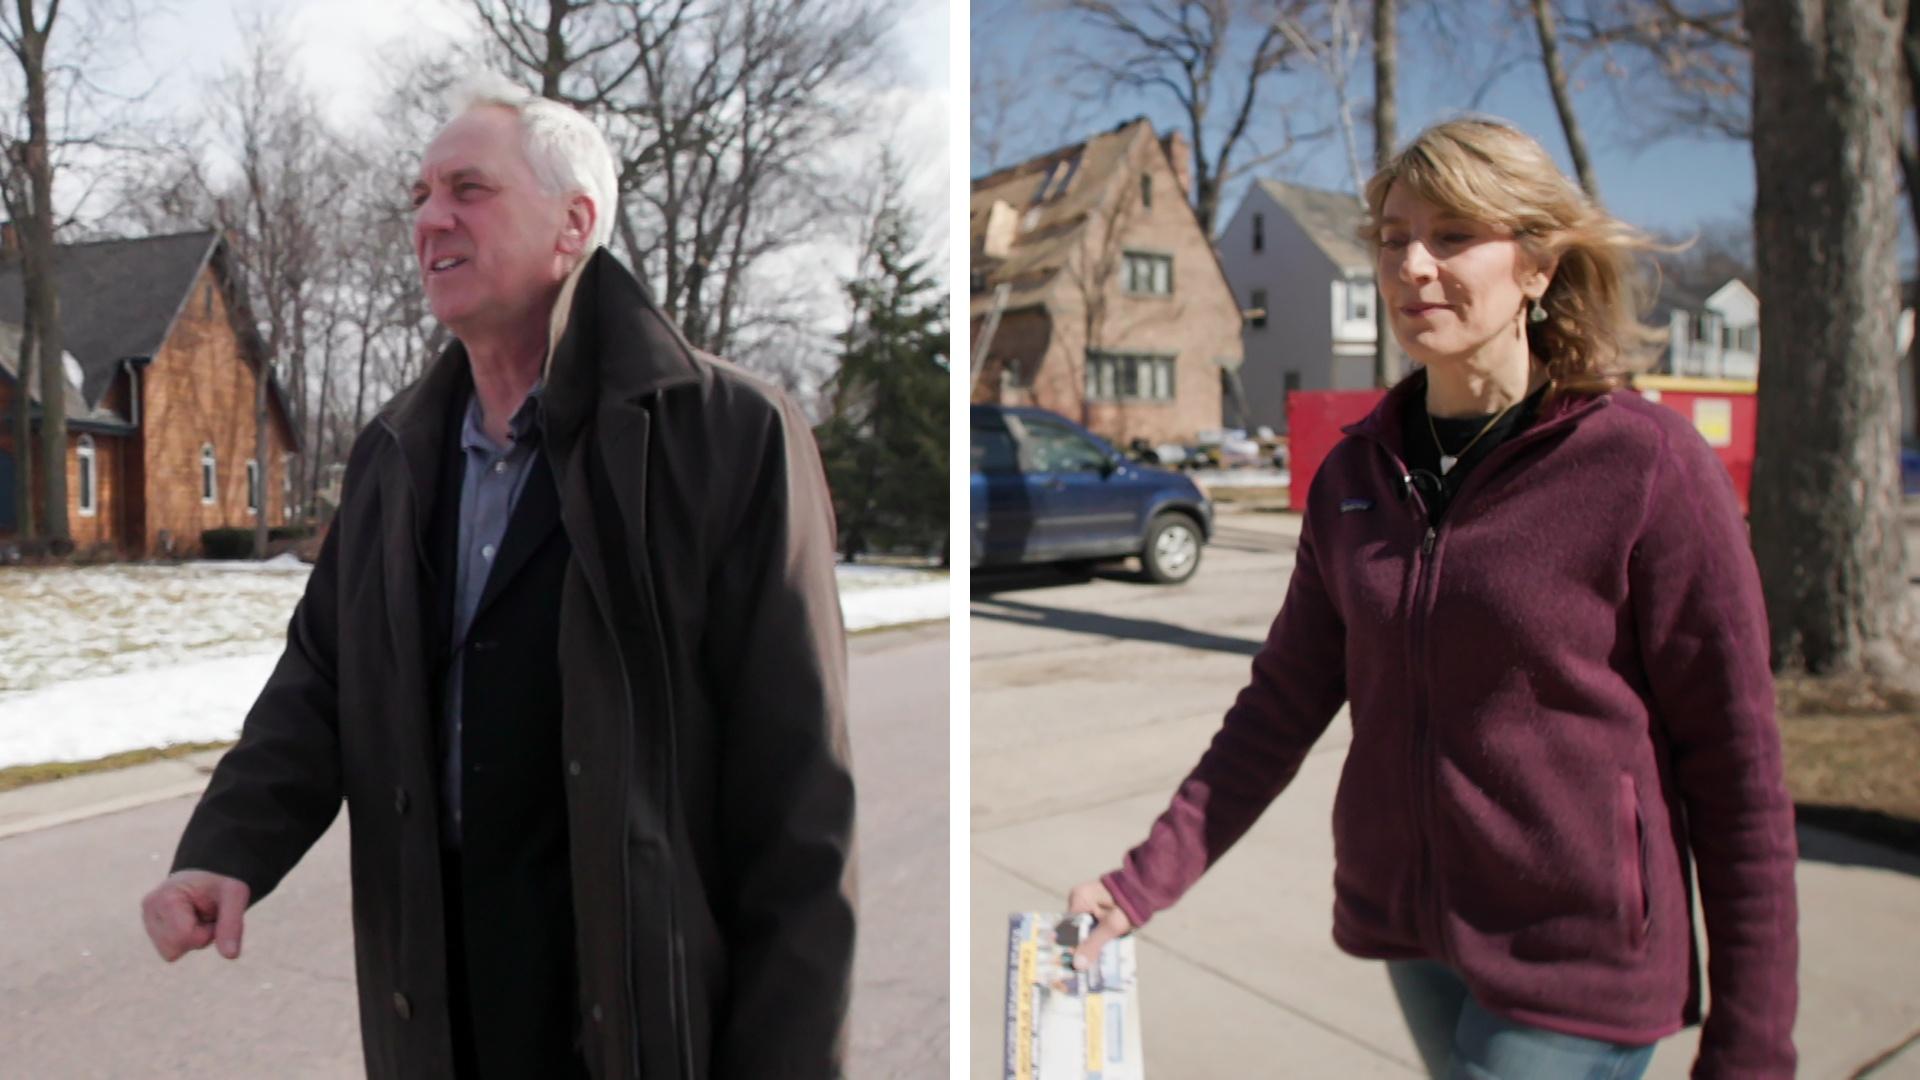 A graphic shows two side-by-side images of Dan Knodl and Jodi Habush Sinykin walking outside with houses in the background.